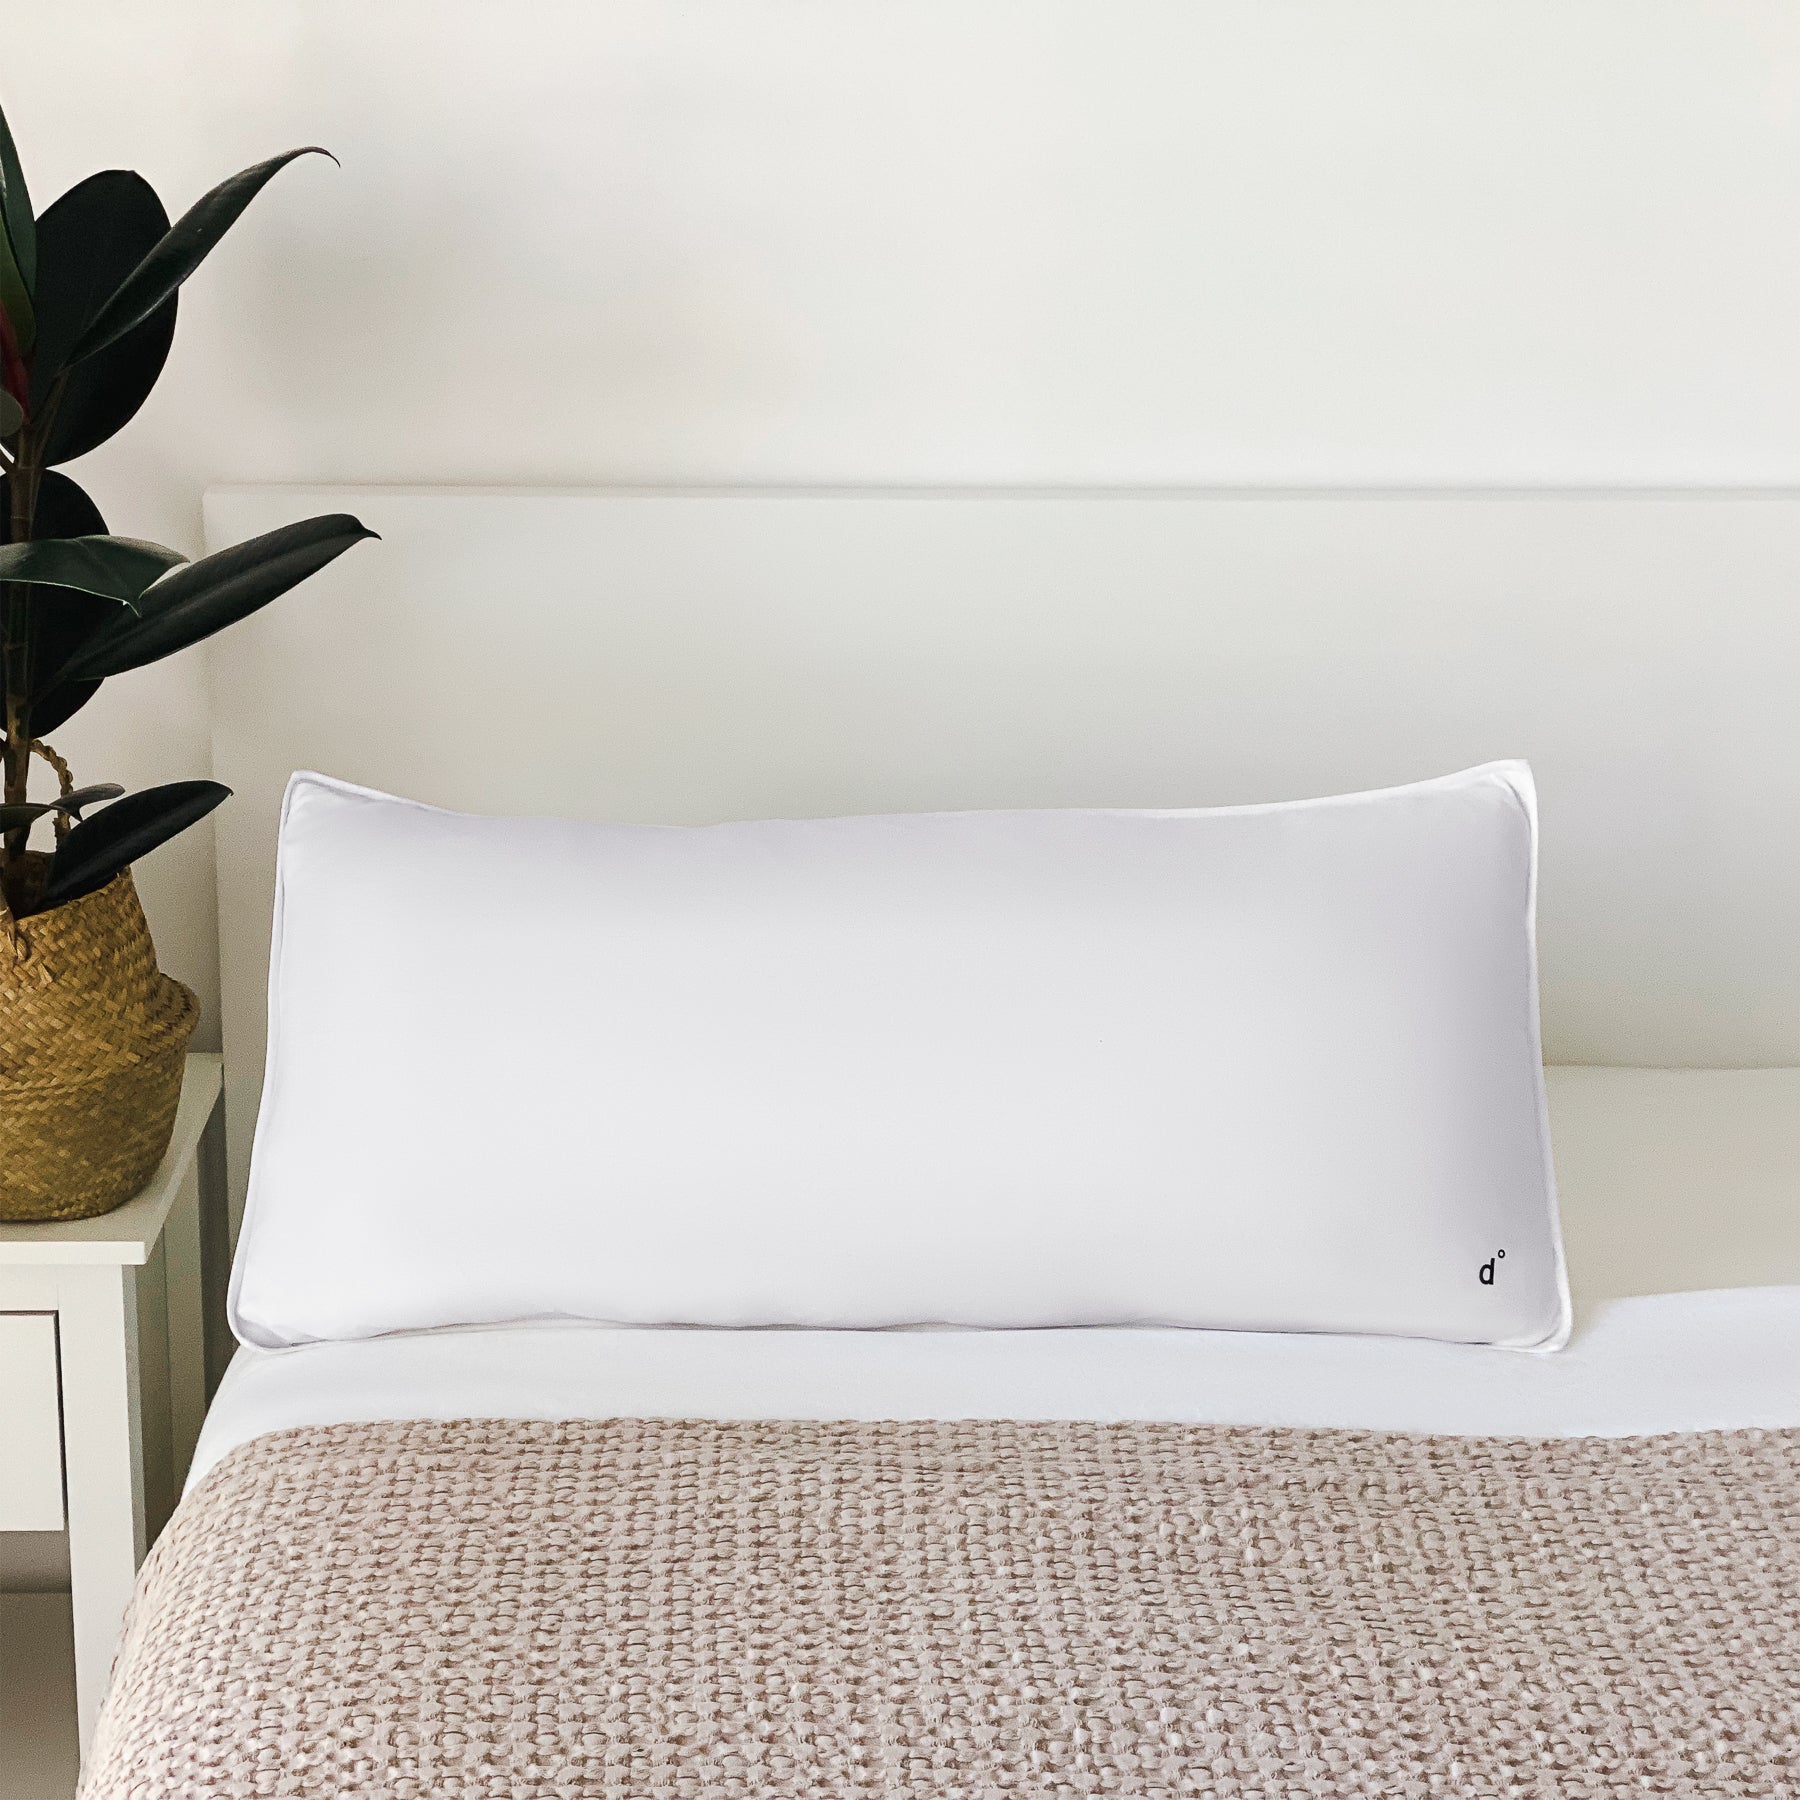 Best cooling pillowcase || White